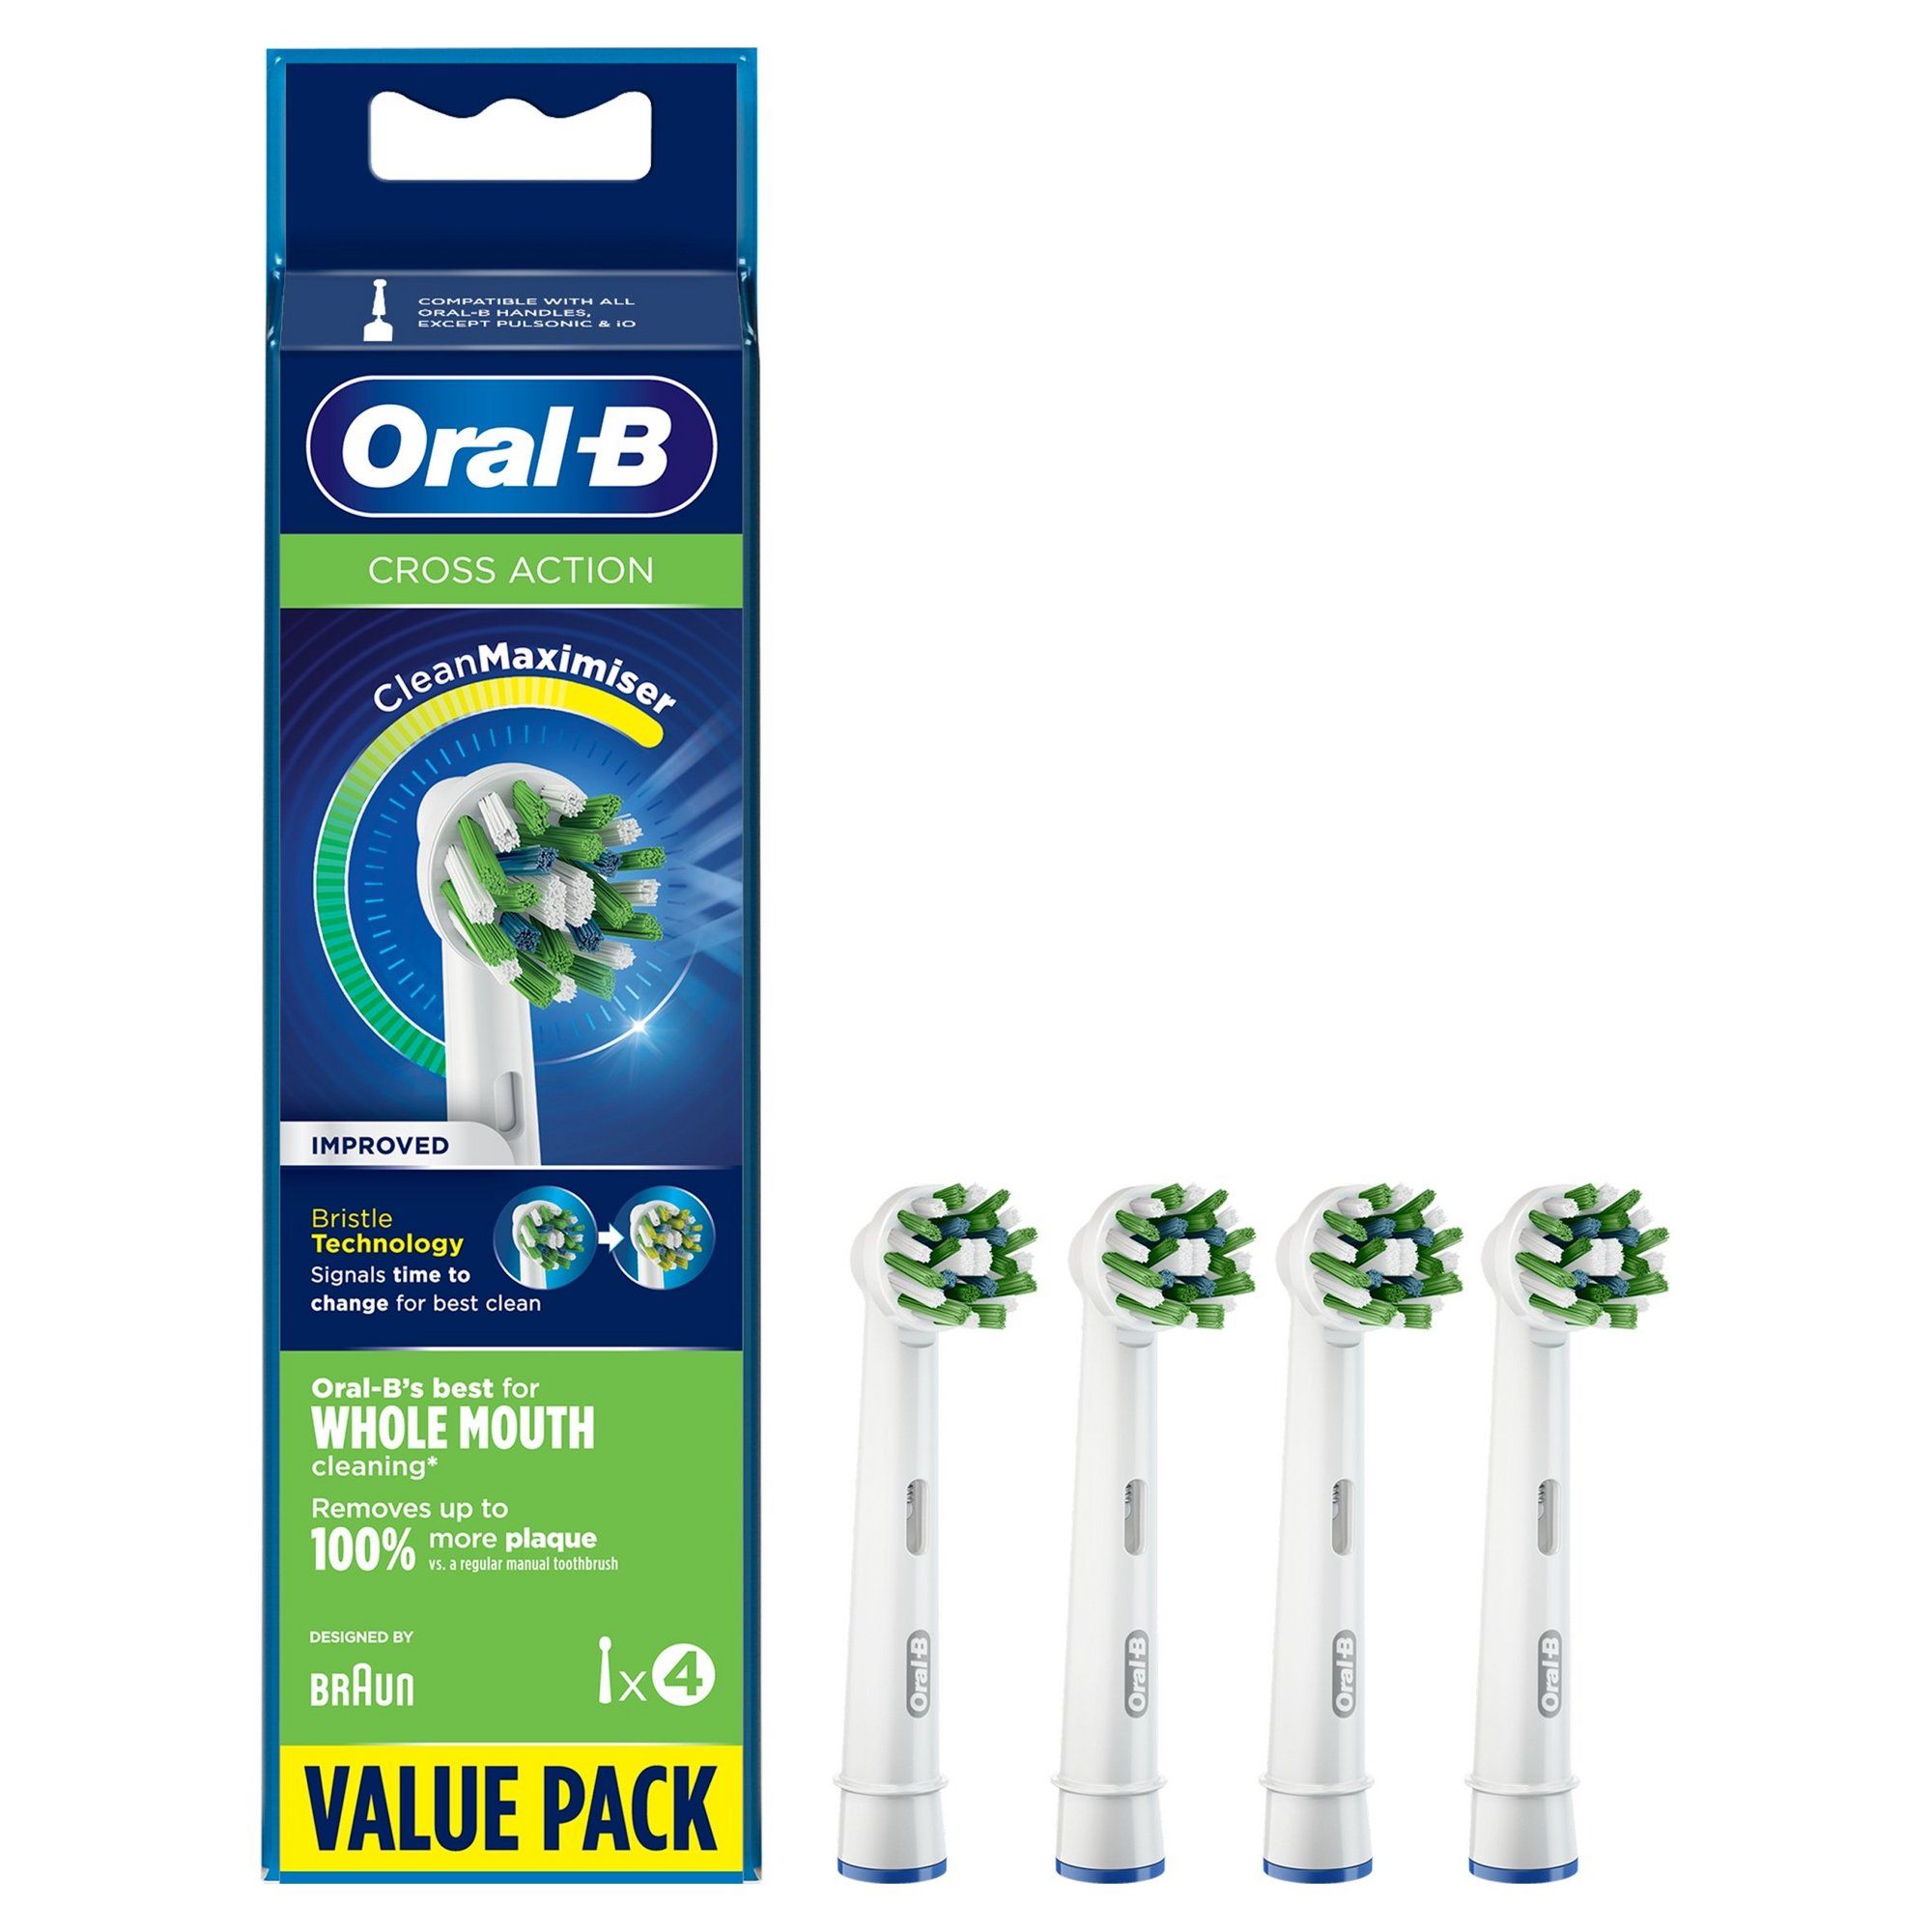 Oral B Pack of 4 Cross Action Clean Maximiser Toothbrush Heads